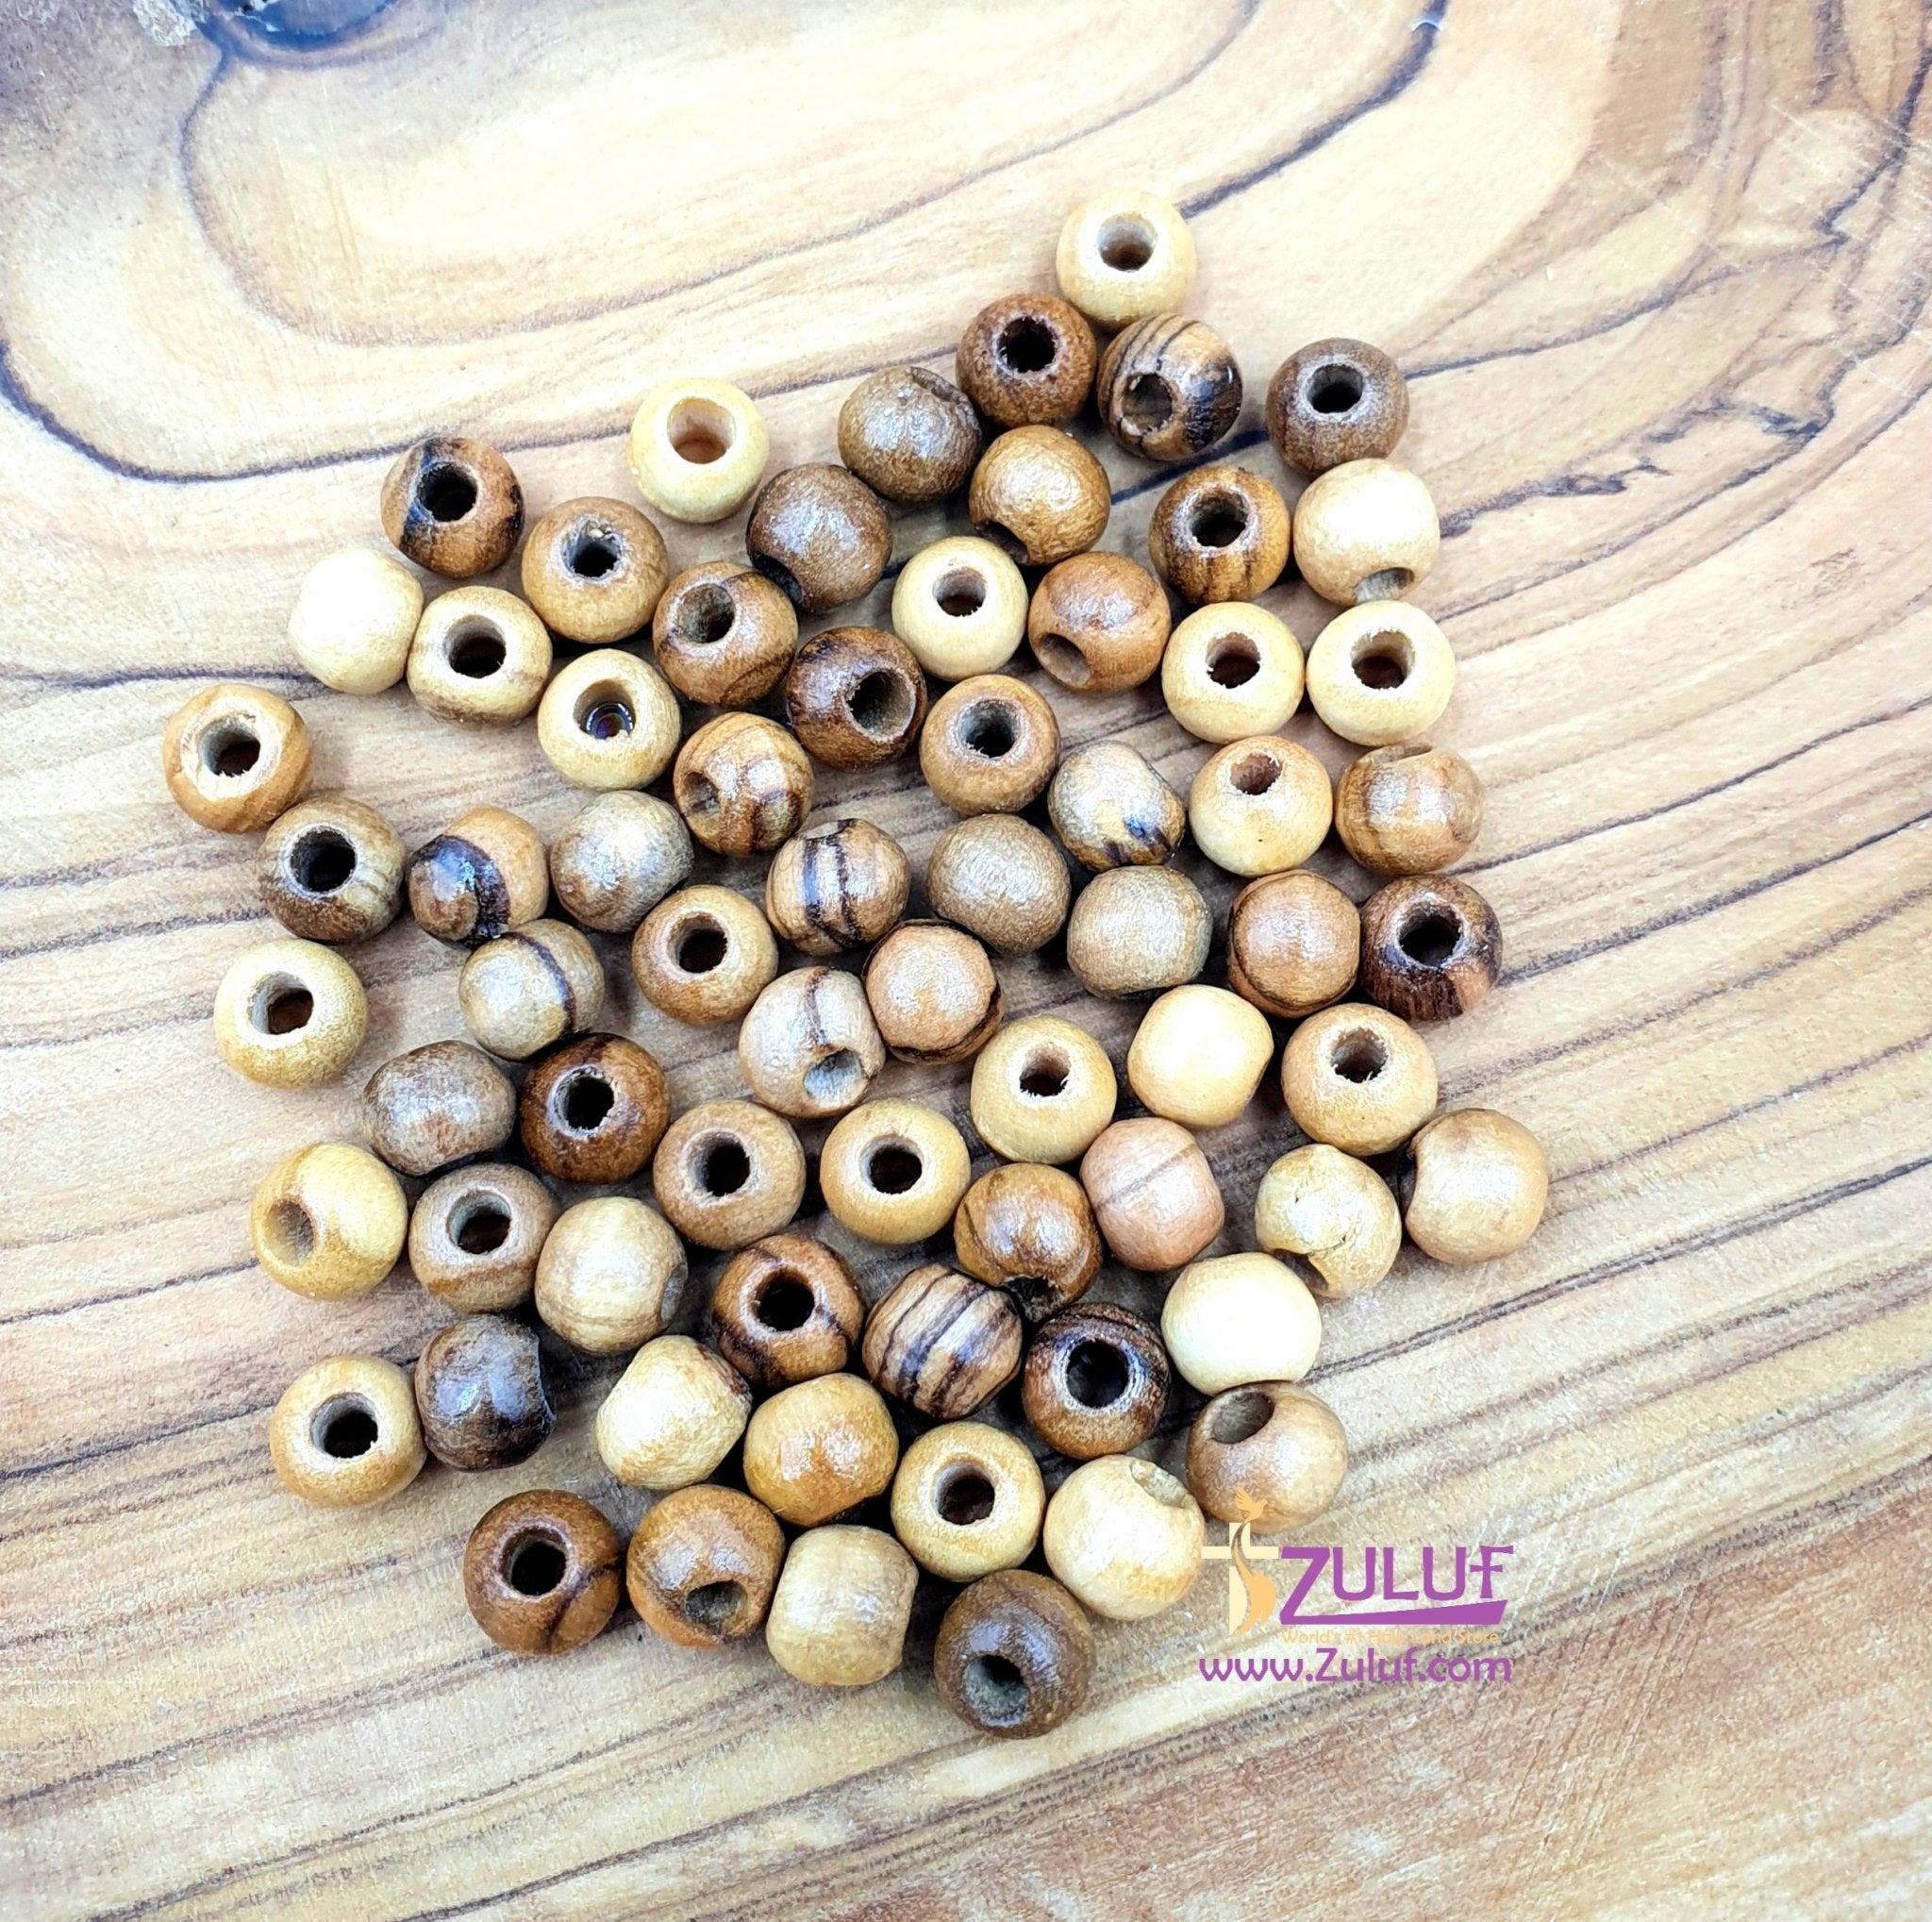 Bethlehem Olive Wood Beads 5mm rosary supplies round beads ( 60 Beads ) BEAD201 - Zuluf